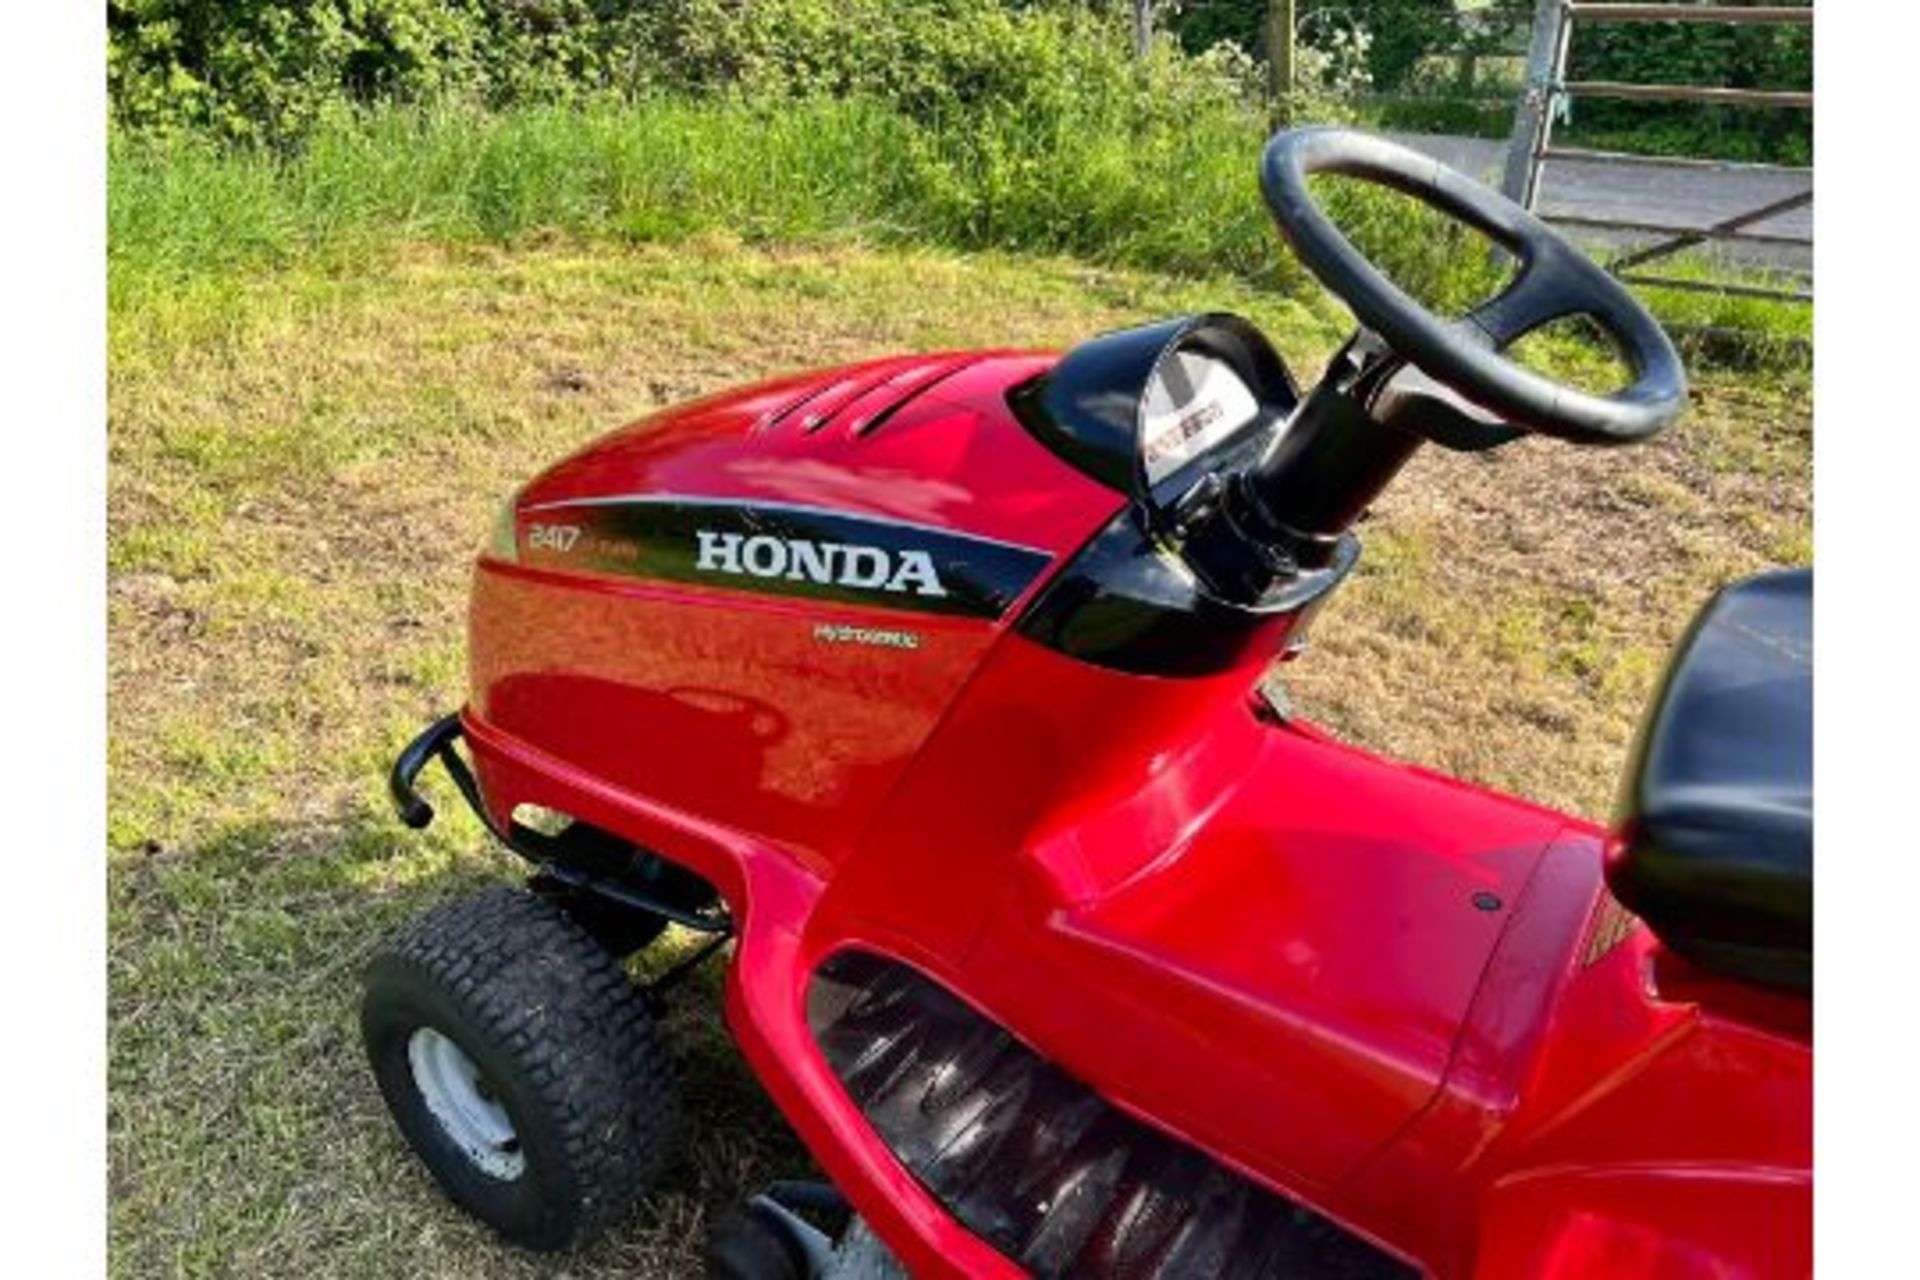 Honda 2417 Ride On Mower With Rear Collector, Runs Drives Cuts And Collects "PLUS VAT" - Image 14 of 22